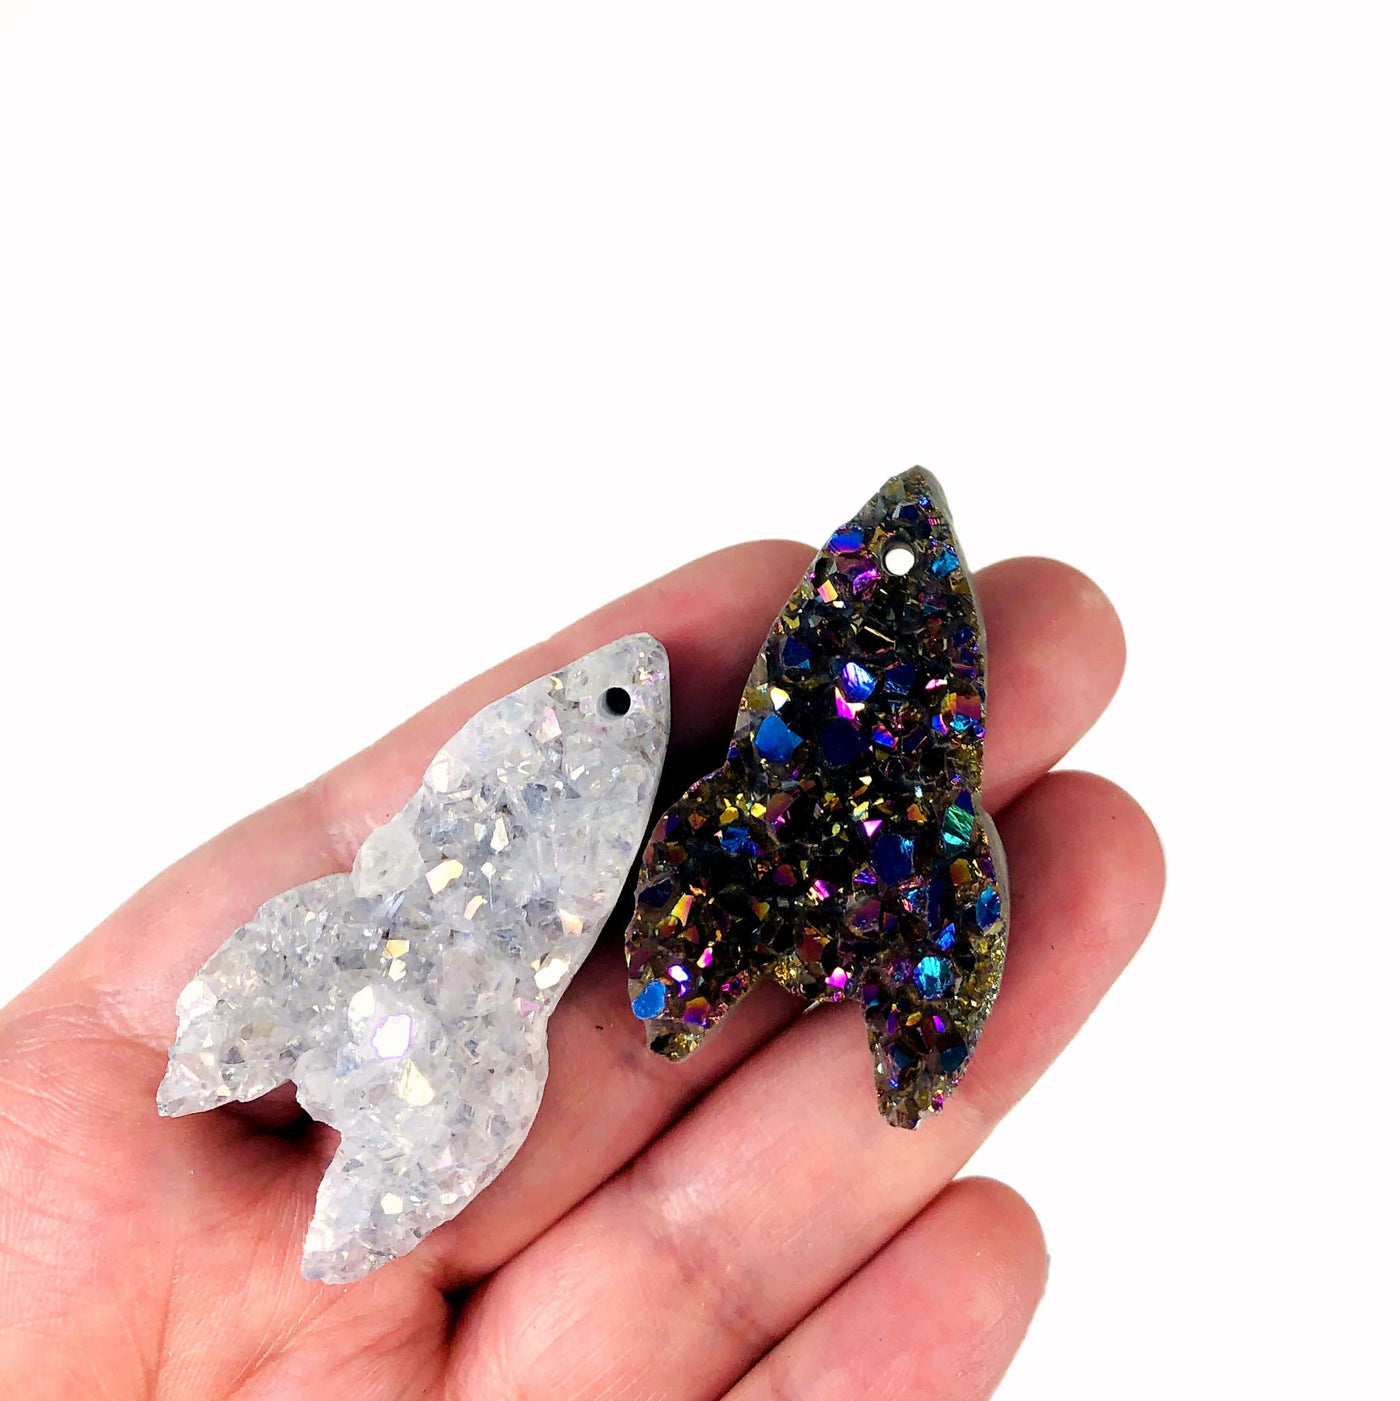 Druzy Rocket Shaped Cabochons  - 2 in a hand